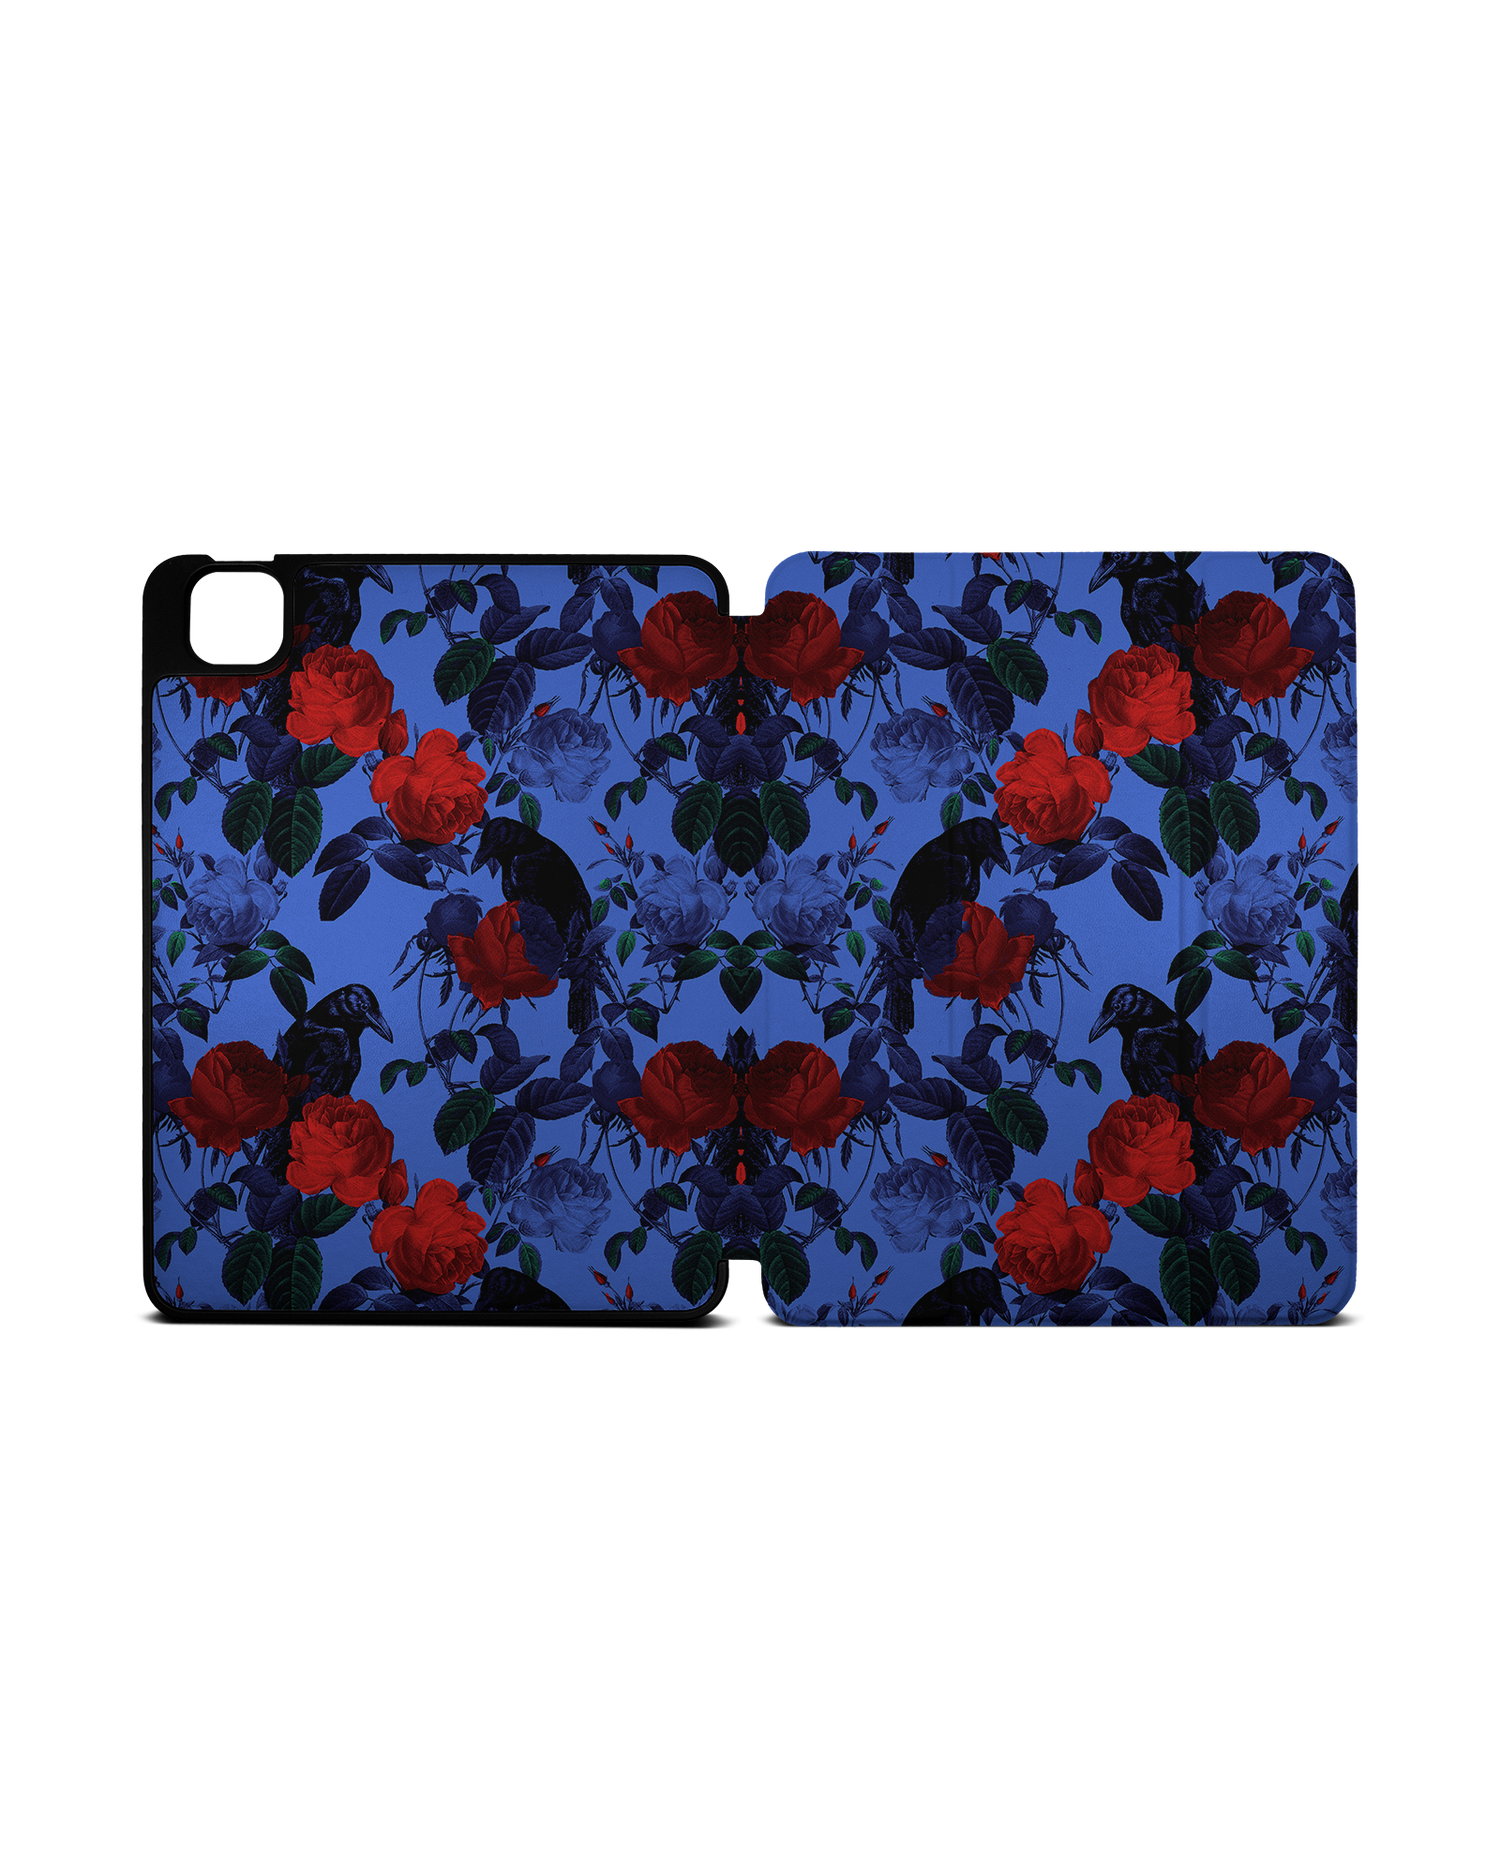 Roses And Ravens iPad Case with Pencil Holder Apple iPad Pro 11